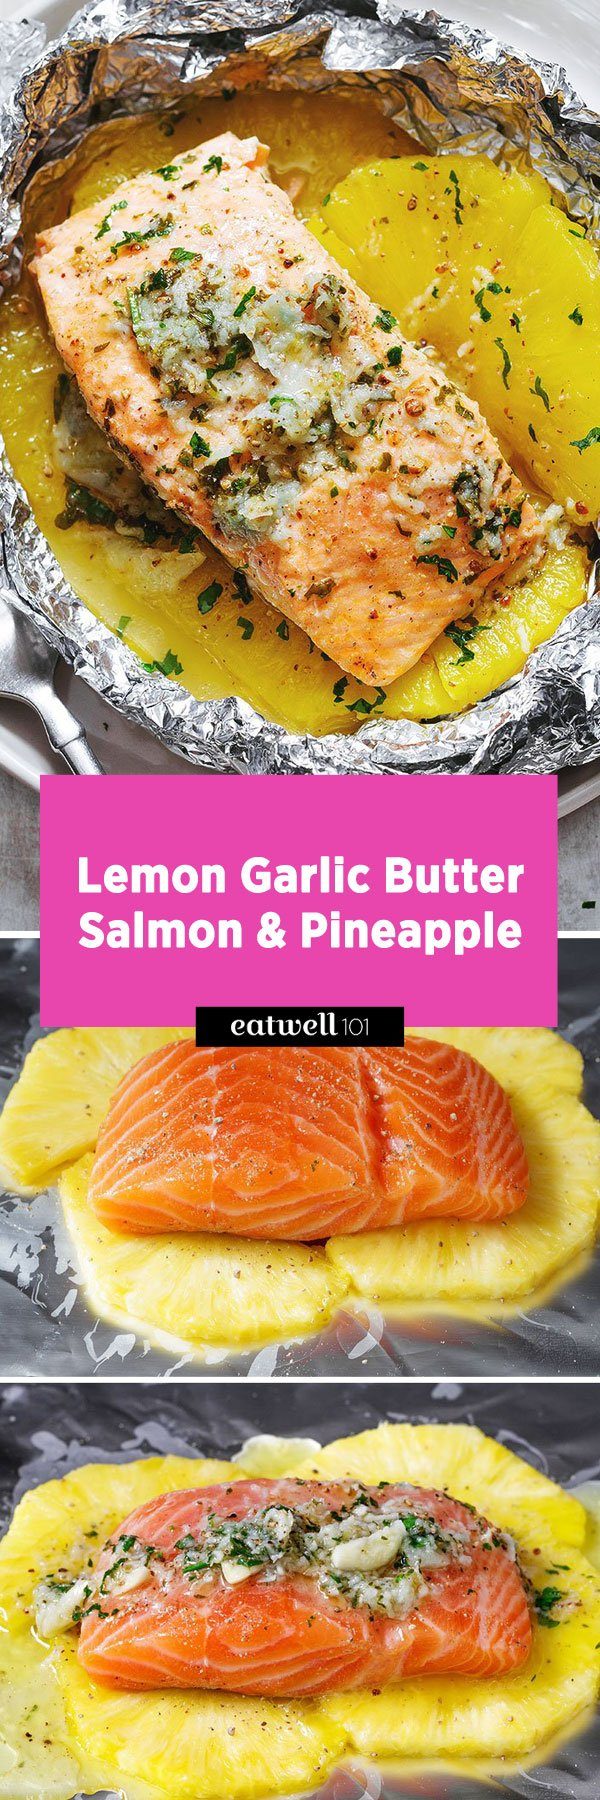 Salmon in Foil Packets – #baked #salmon #recipe #eatwell101 - Easy to make, tastes delicious & ready in 20mins!